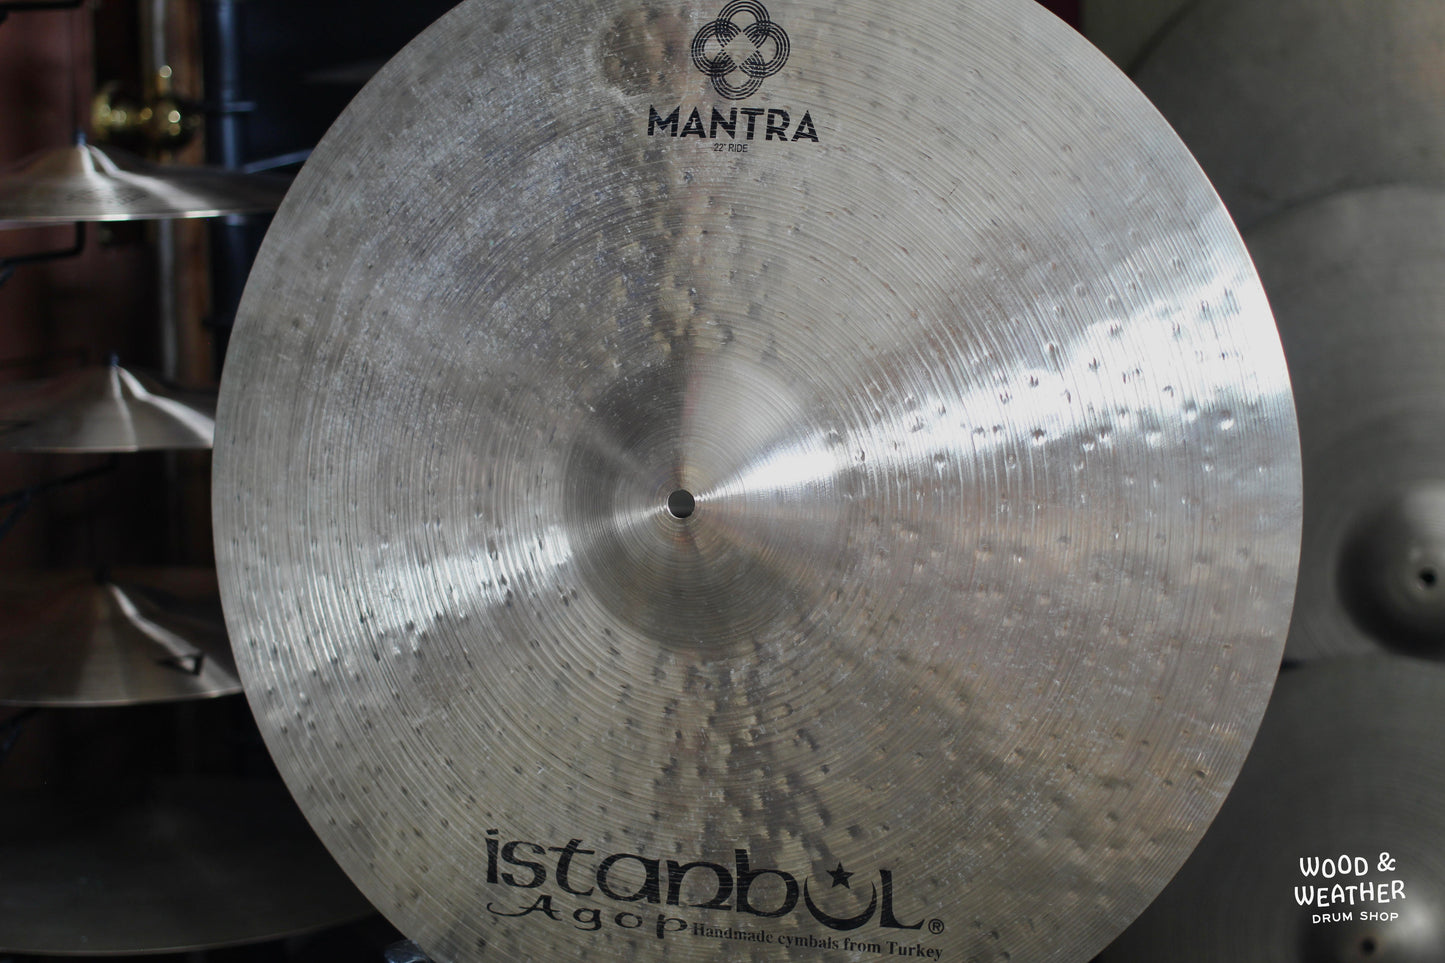 Used Istanbul Agop 22" Mantra Ride Cymbal 2800g